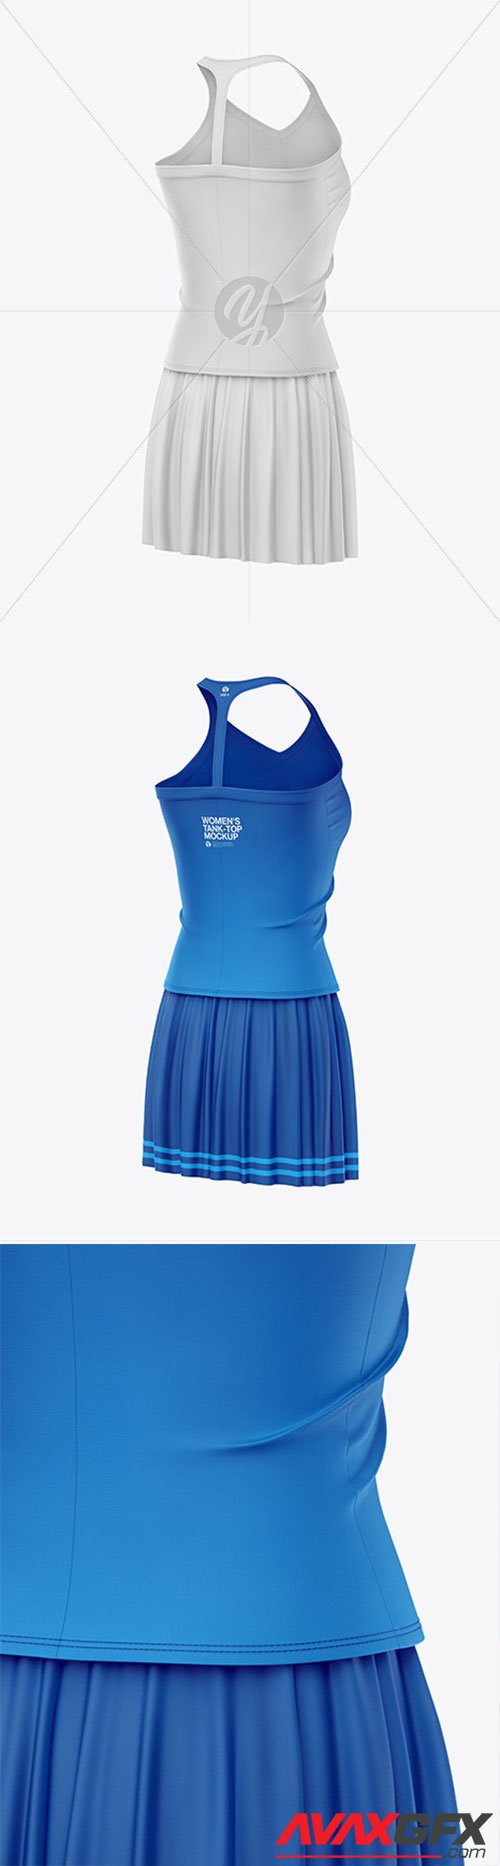 Download Women's Tennis Clothing Set Mockup 60732 » AVAXGFX - All ...